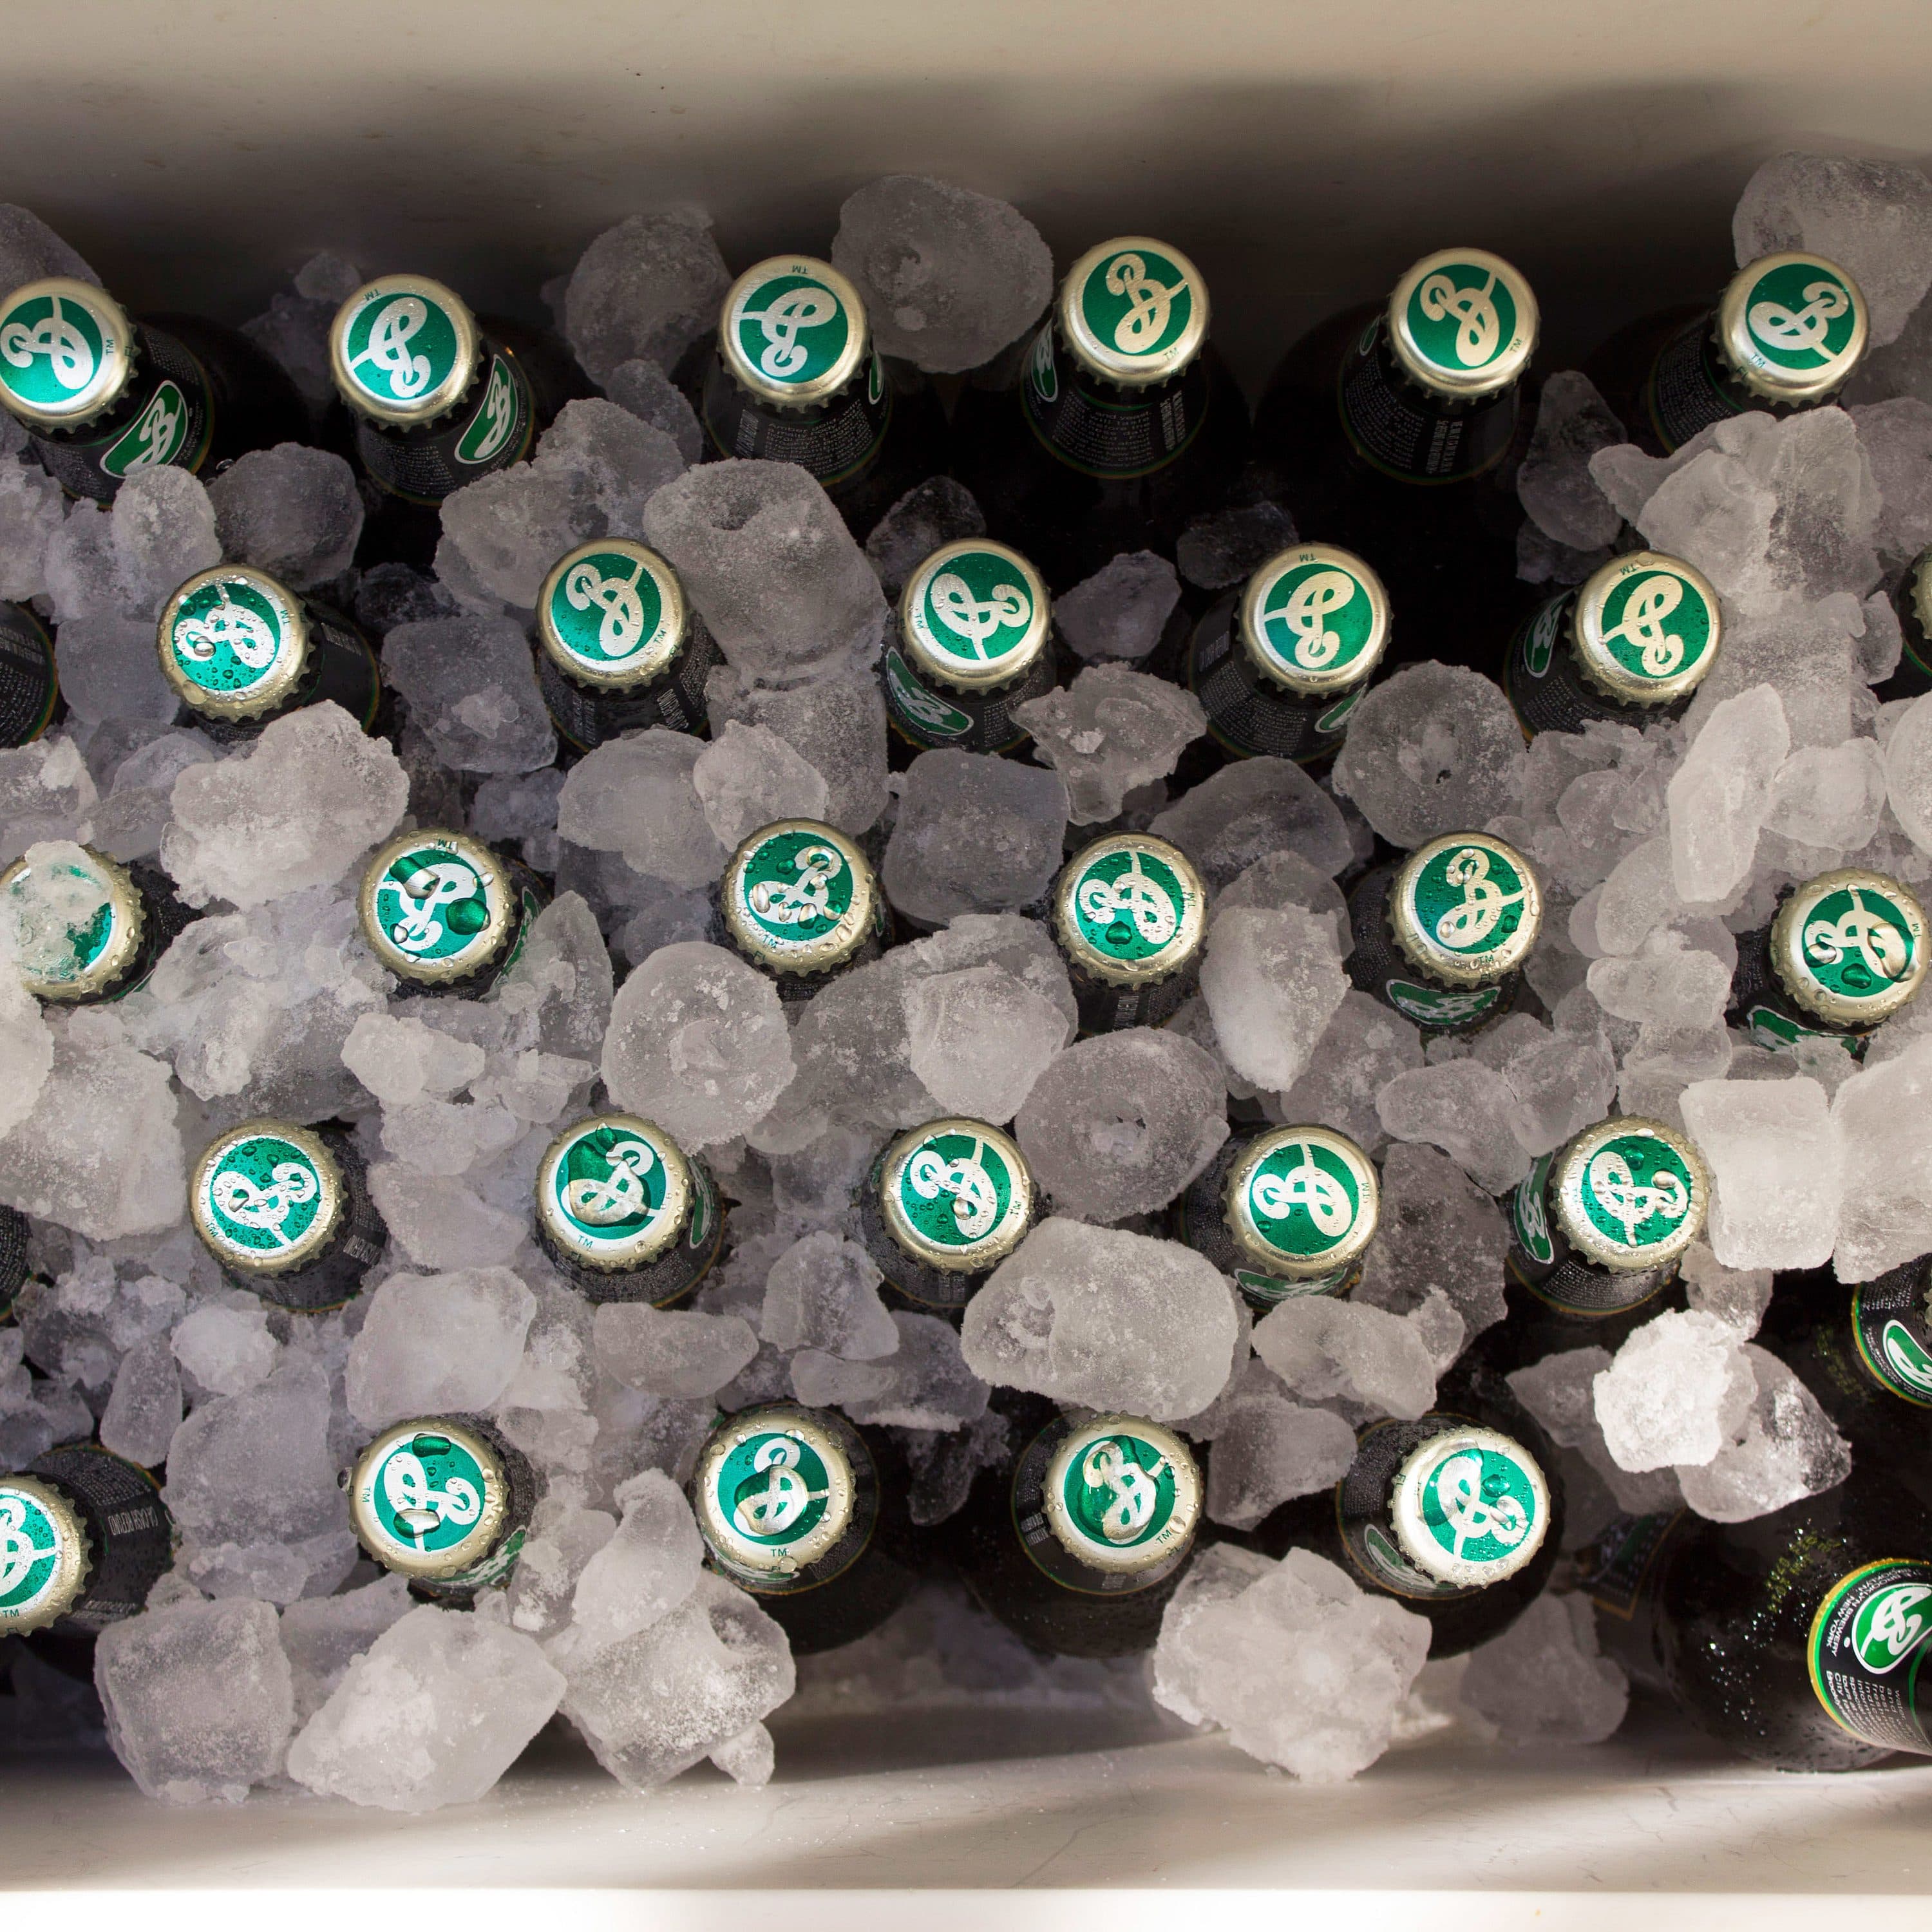 A cooler filled with ice and several green-capped bottled beverages lying on their sides. The bottles have a logo with a stylized "B" on the caps. The ice is evenly distributed, keeping the bottles cold.